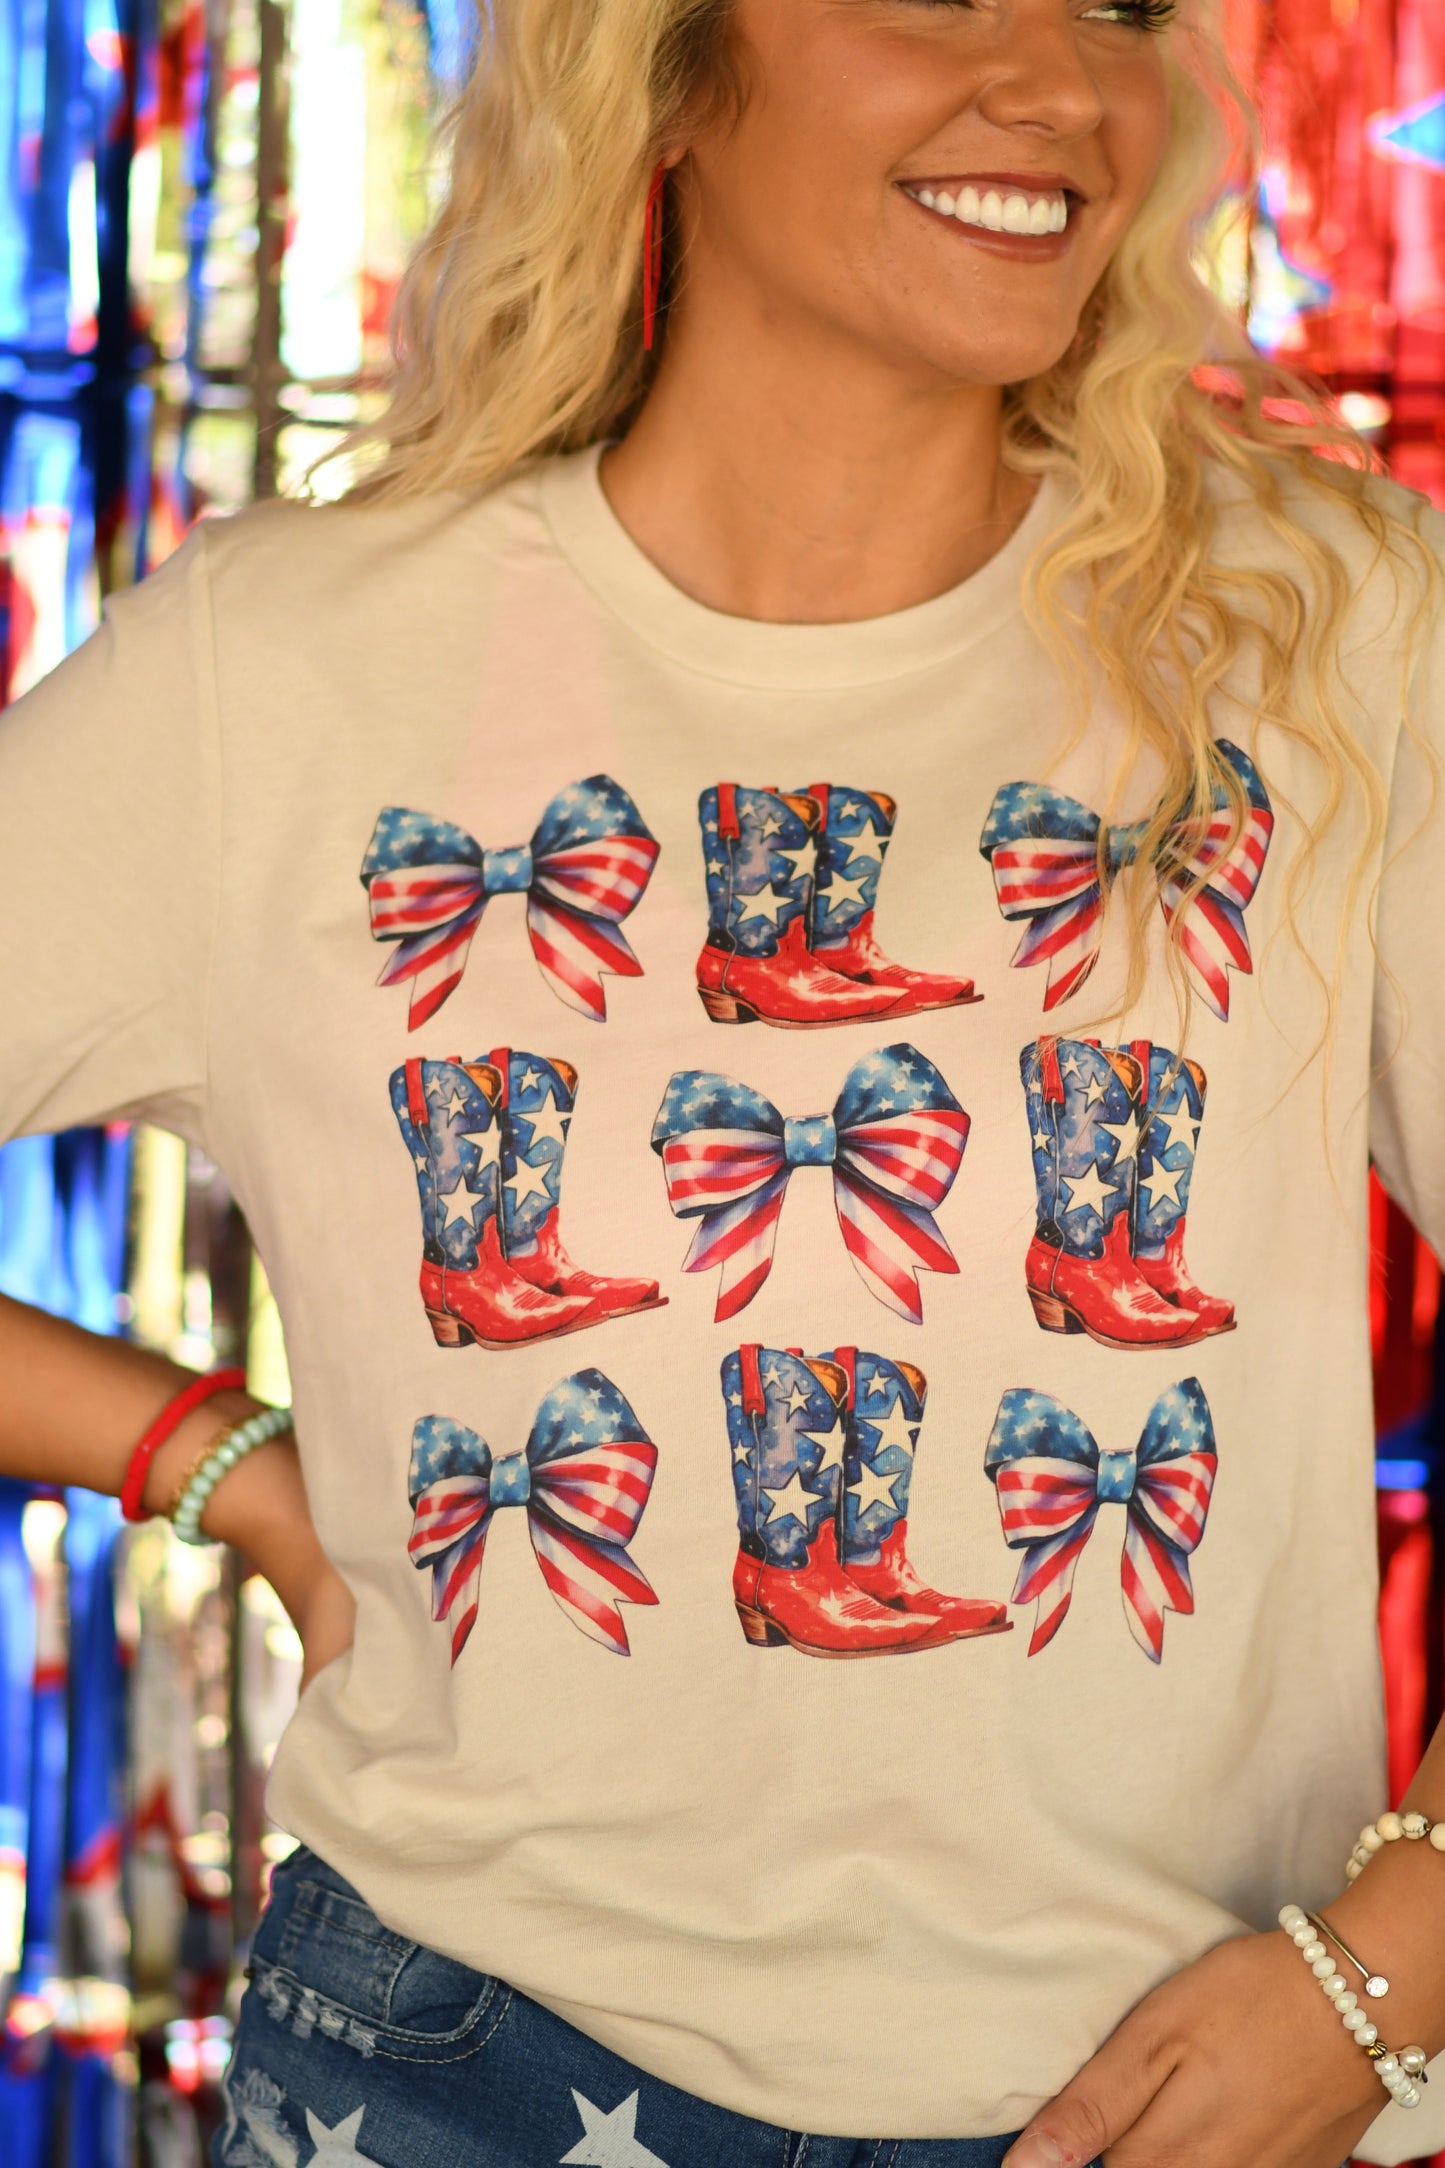 Boots & Bows Tee